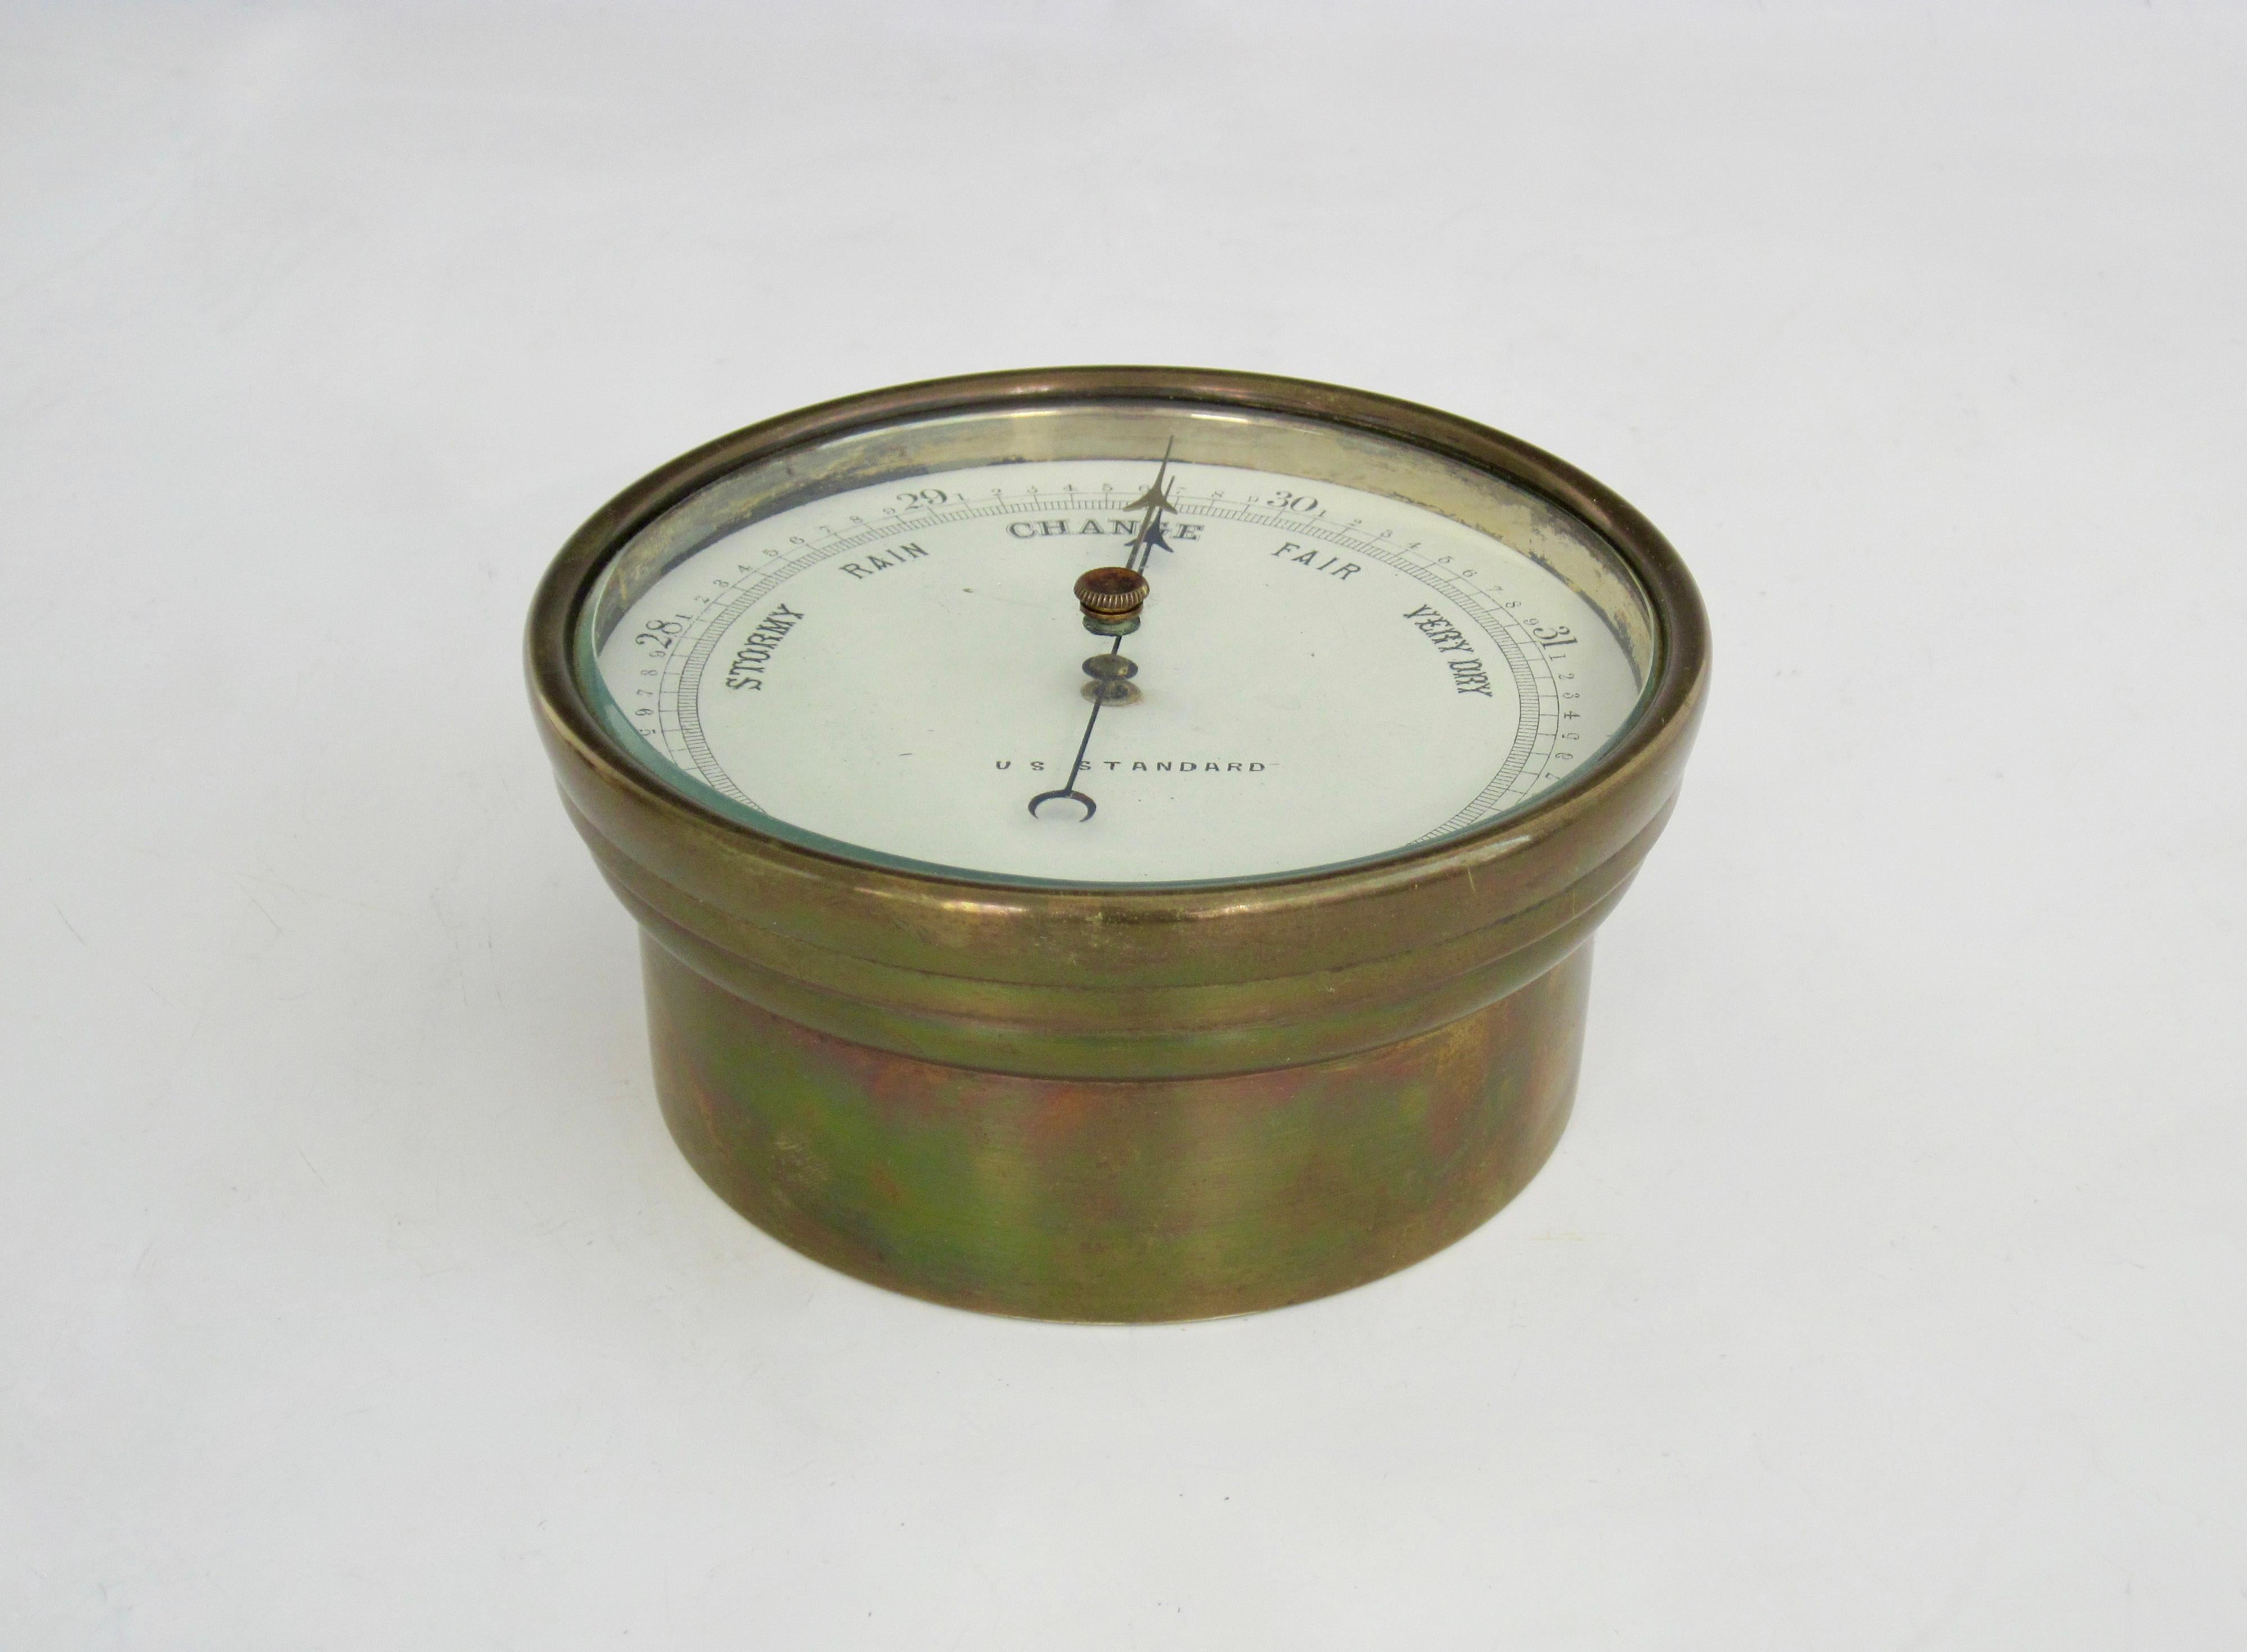 A nicely patina'd brass U.S. Standard holosteric barometer., circa early 1900s. 4.75